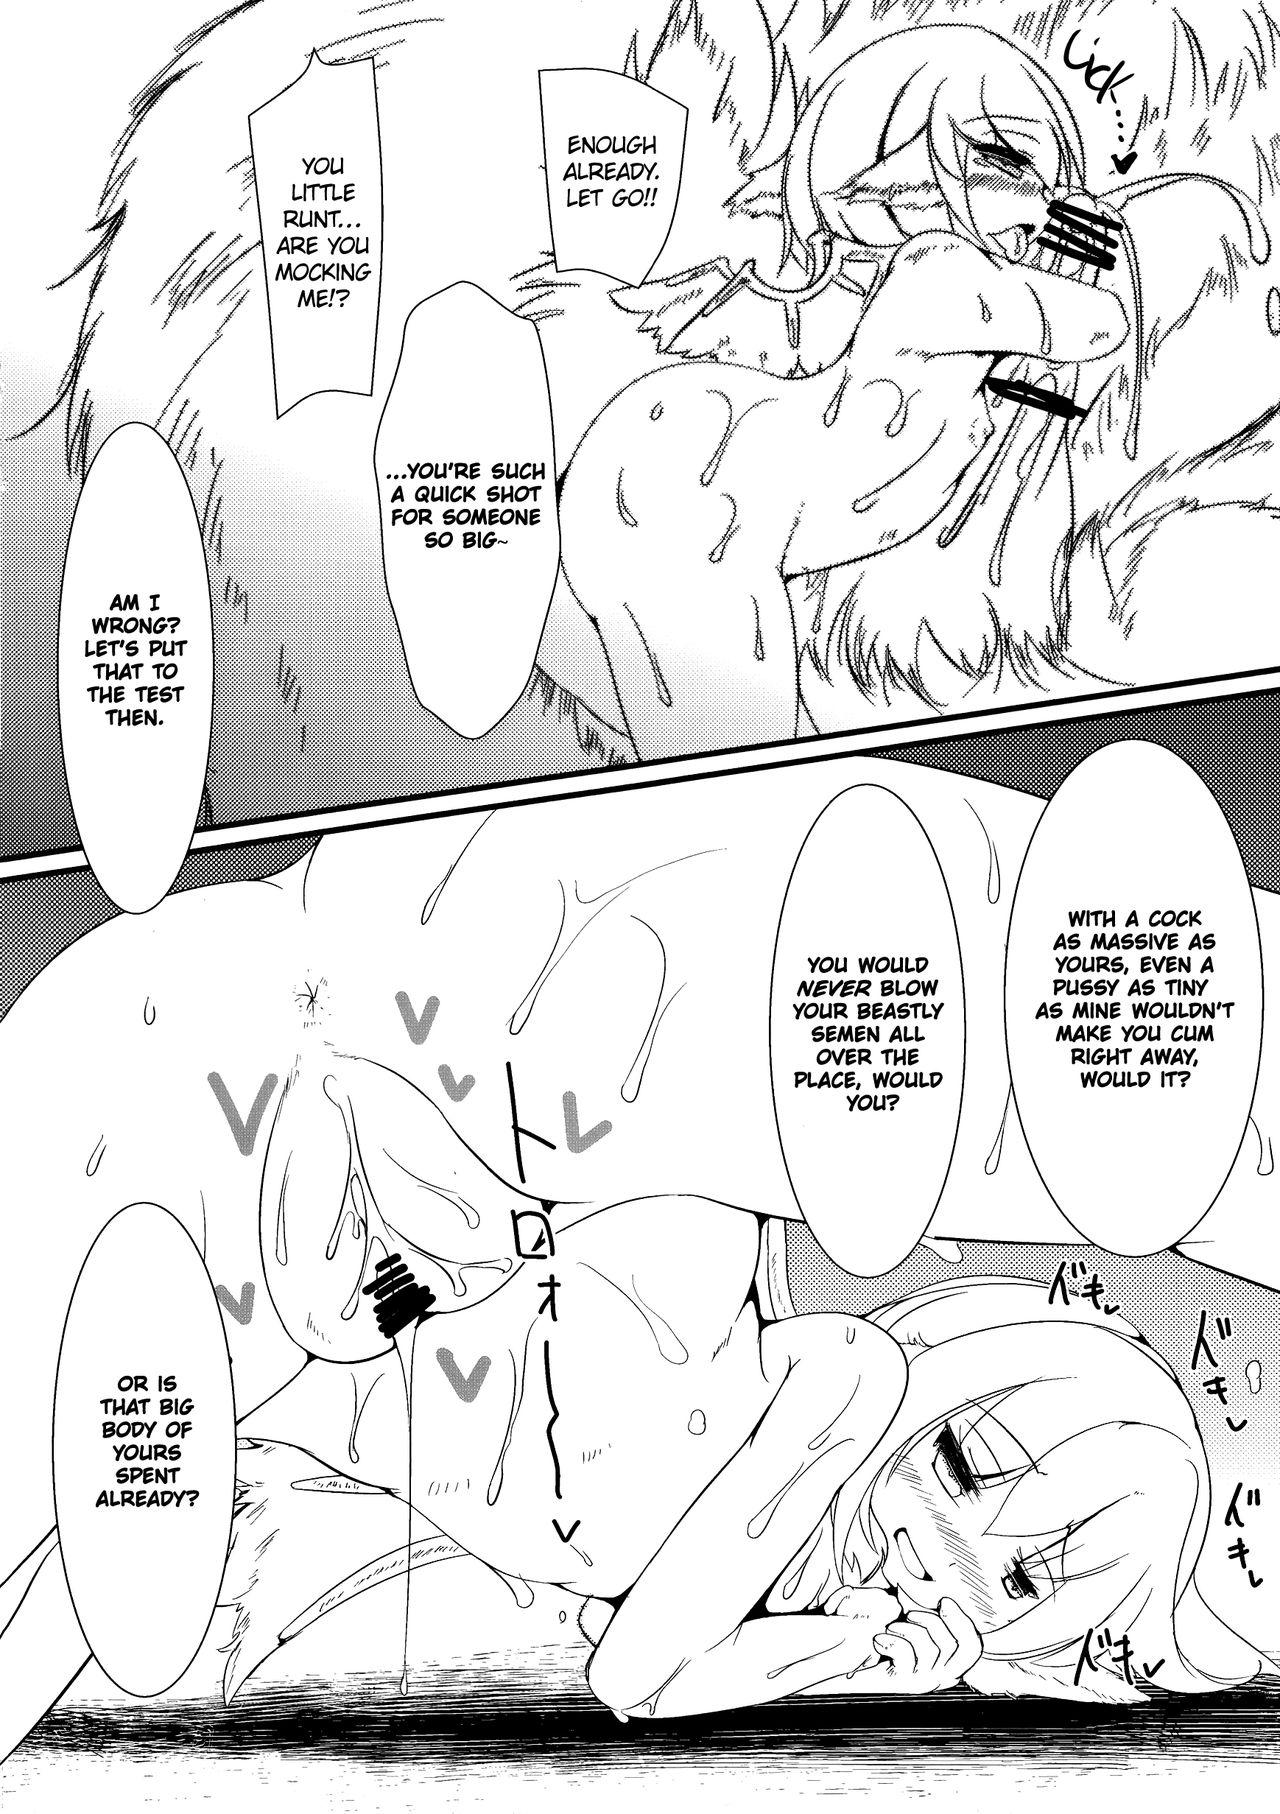 Small Tits Kotoristi to Kyojuu | Little Bird Mystia and the Giant Beast - Touhou project Huge Cock - Page 5